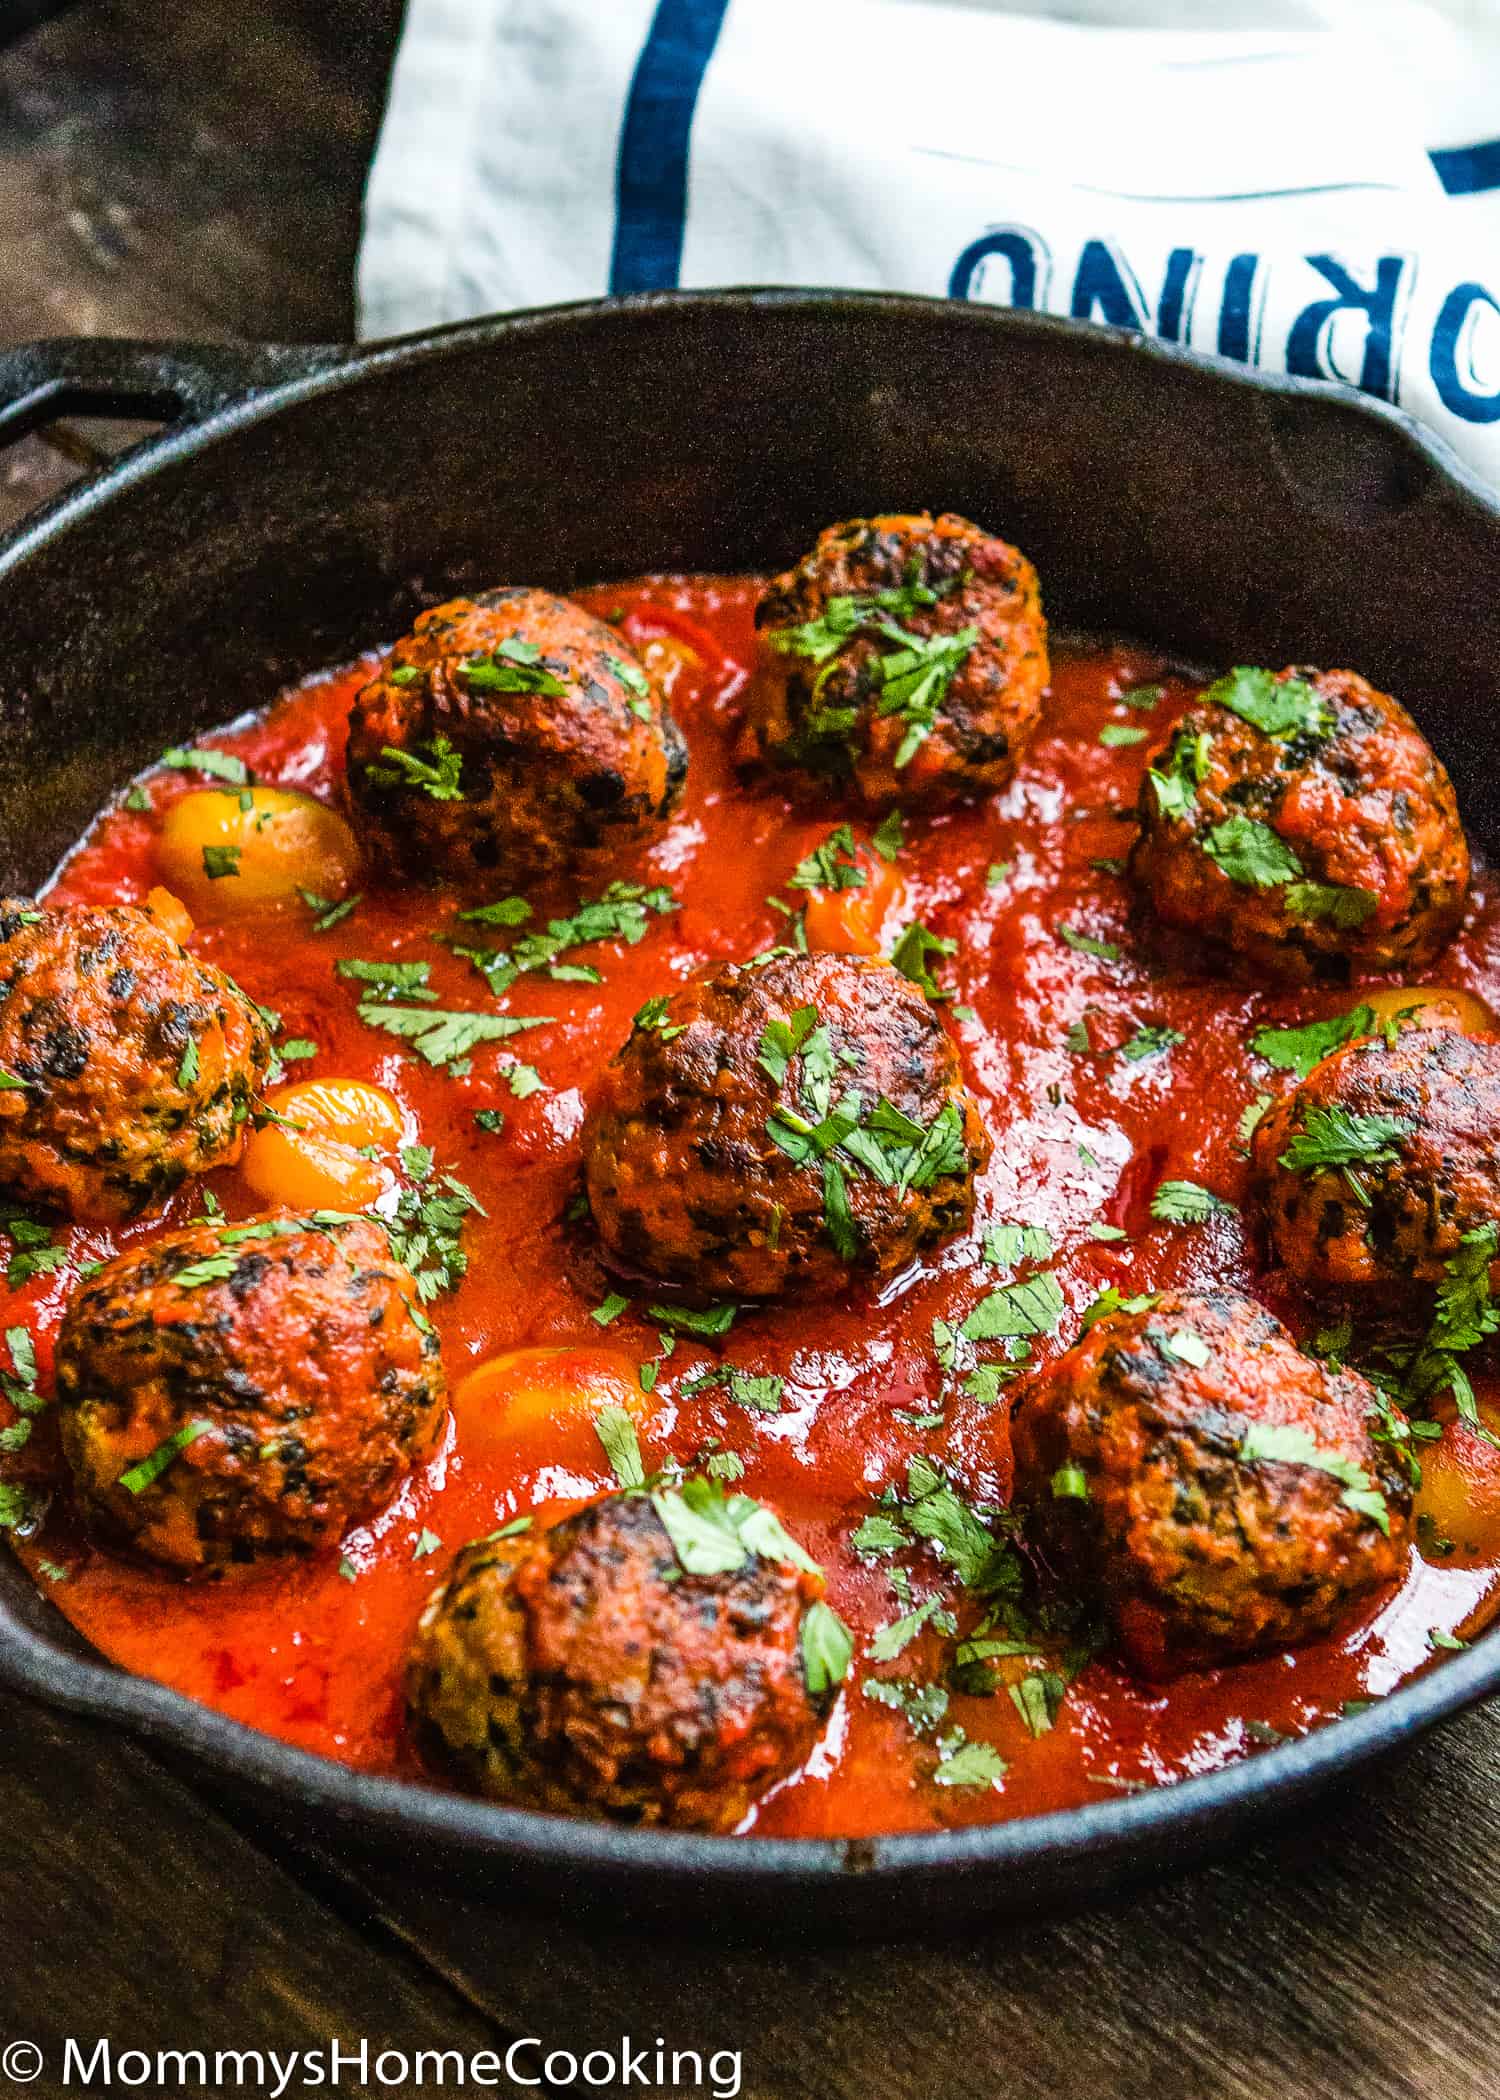 egg-free turkey meatballs with marinara sauce in a skillet and a tea towel in the background.